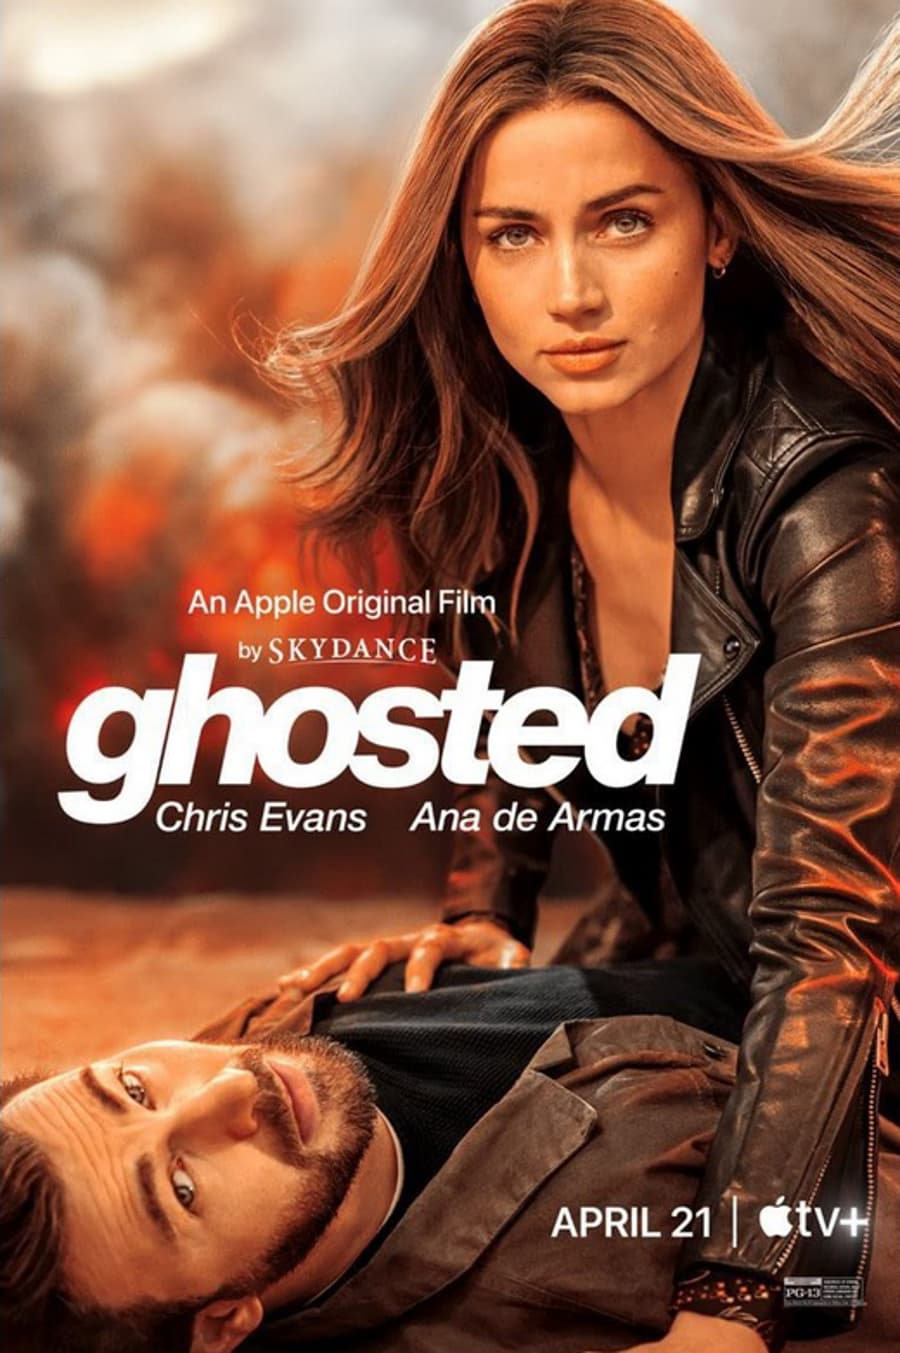 Ghosted film